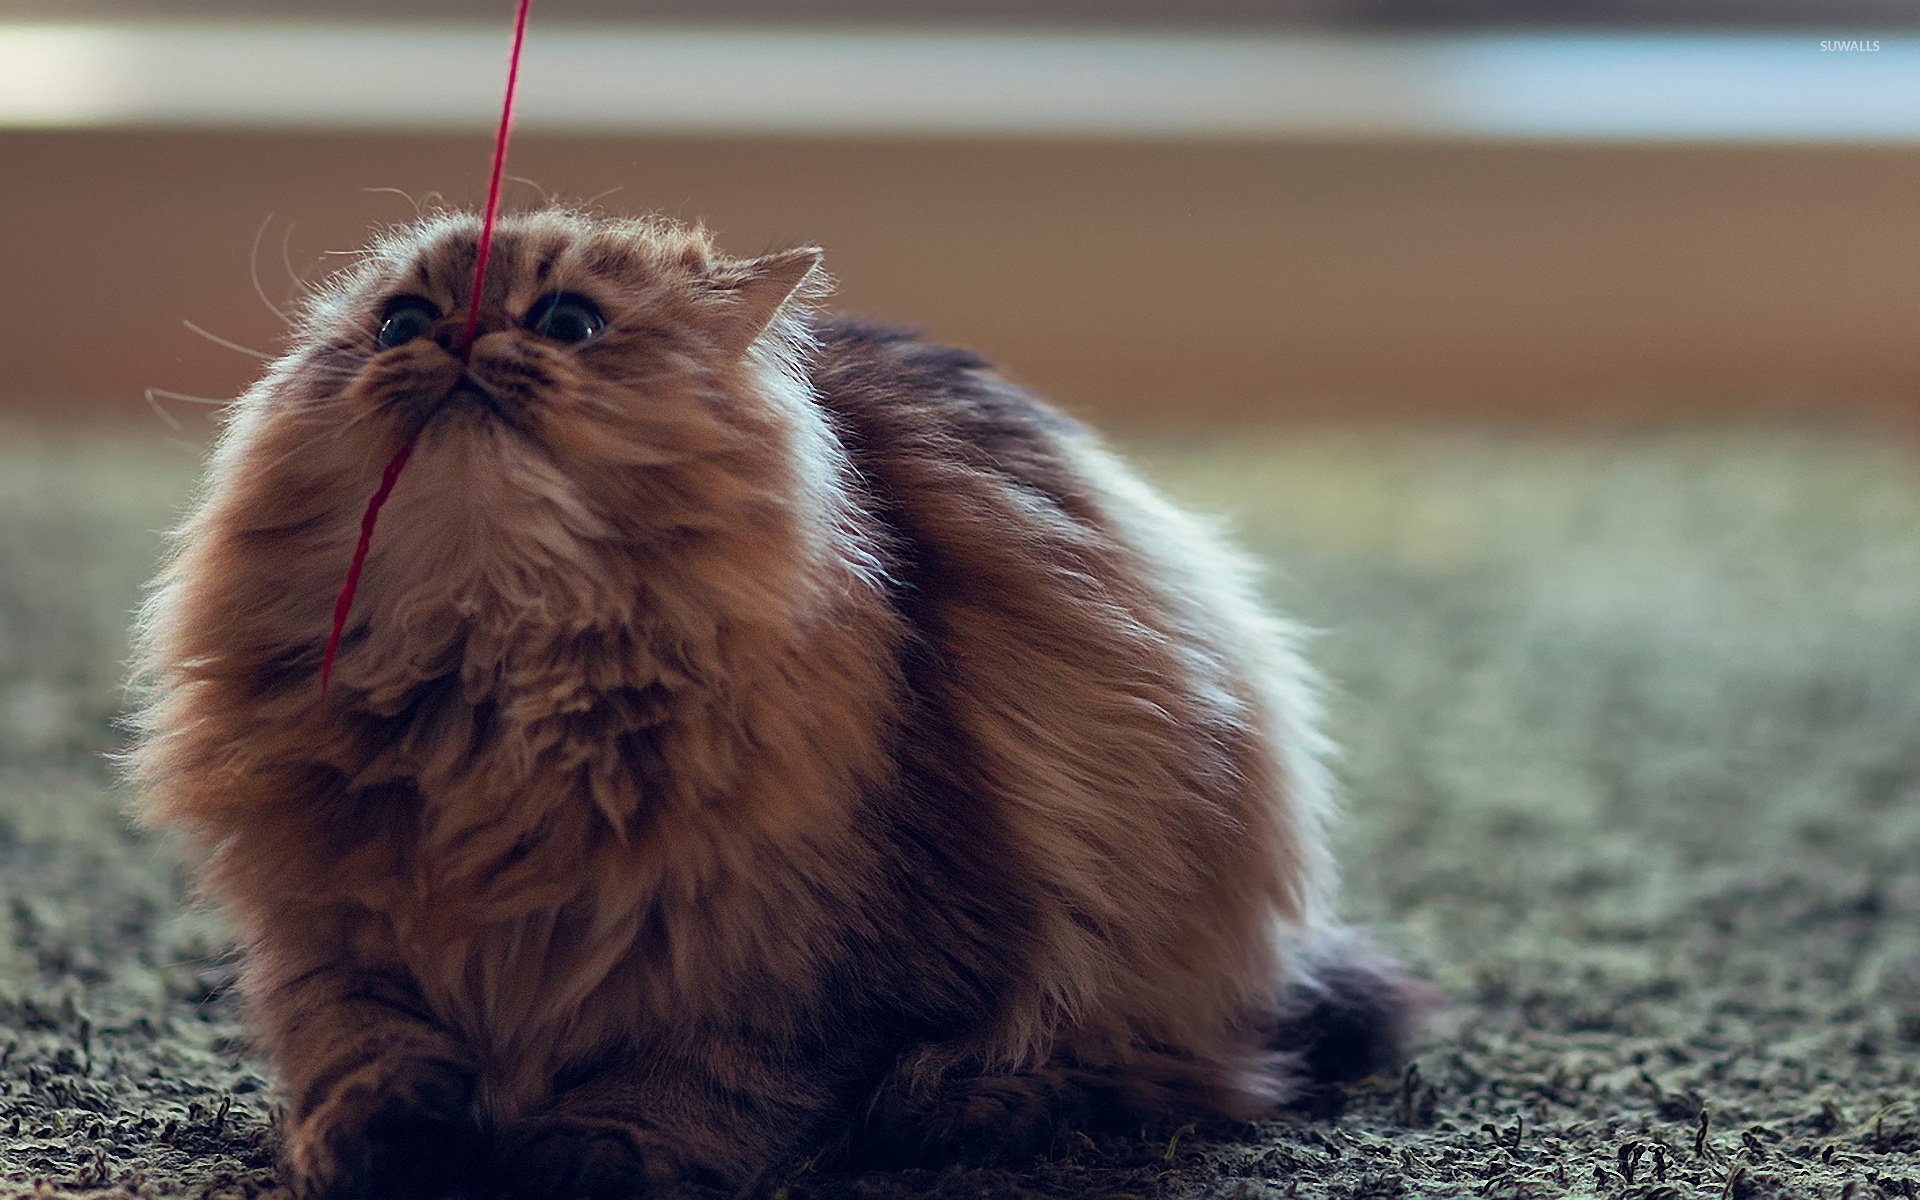 Fluffy cat playing with a red string wallpaper wallpaper